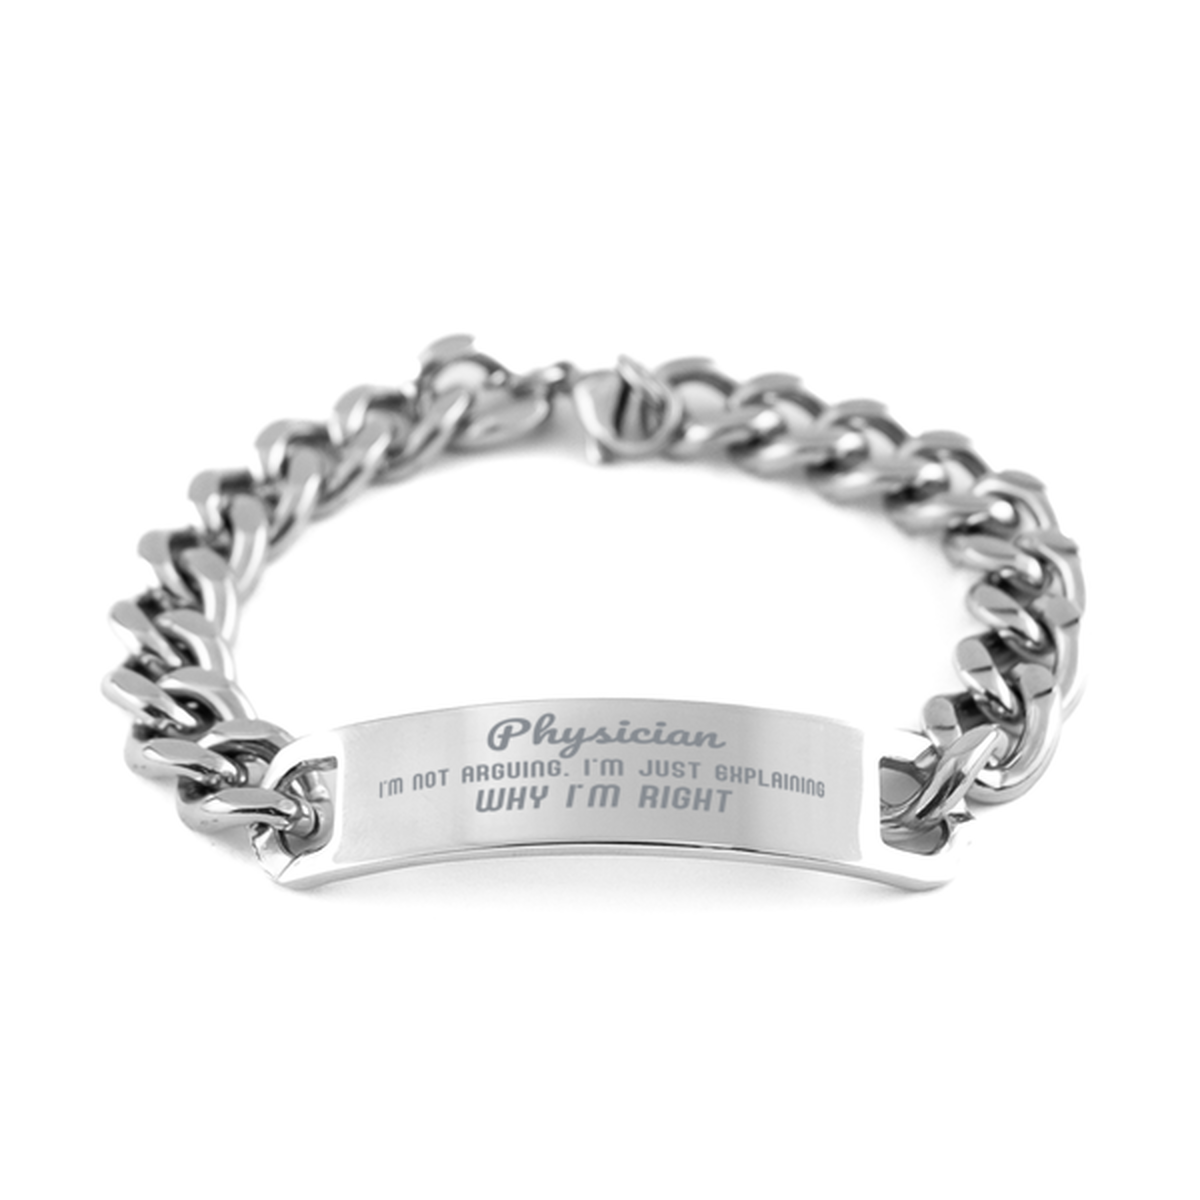 Physician I'm not Arguing. I'm Just Explaining Why I'm RIGHT Cuban Chain Stainless Steel Bracelet, Graduation Birthday Christmas Physician Gifts For Physician Funny Saying Quote Present for Men Women Coworker